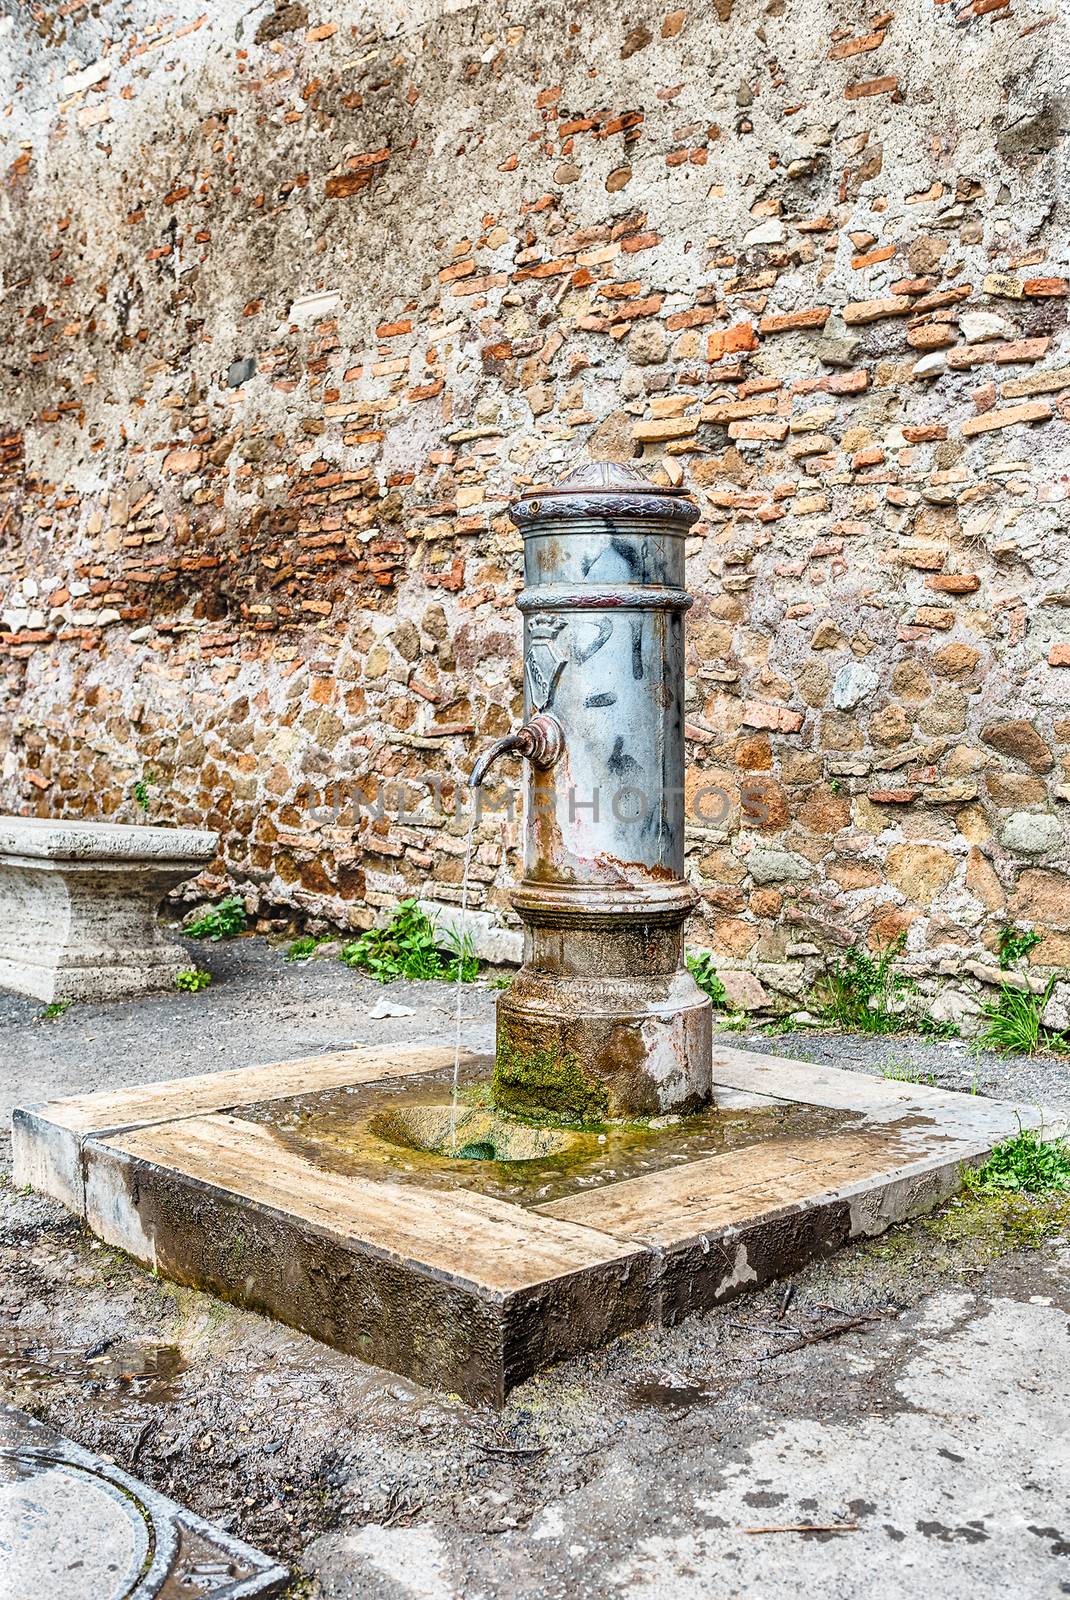 Traditional free water public fountain in Rome, Italy by marcorubino